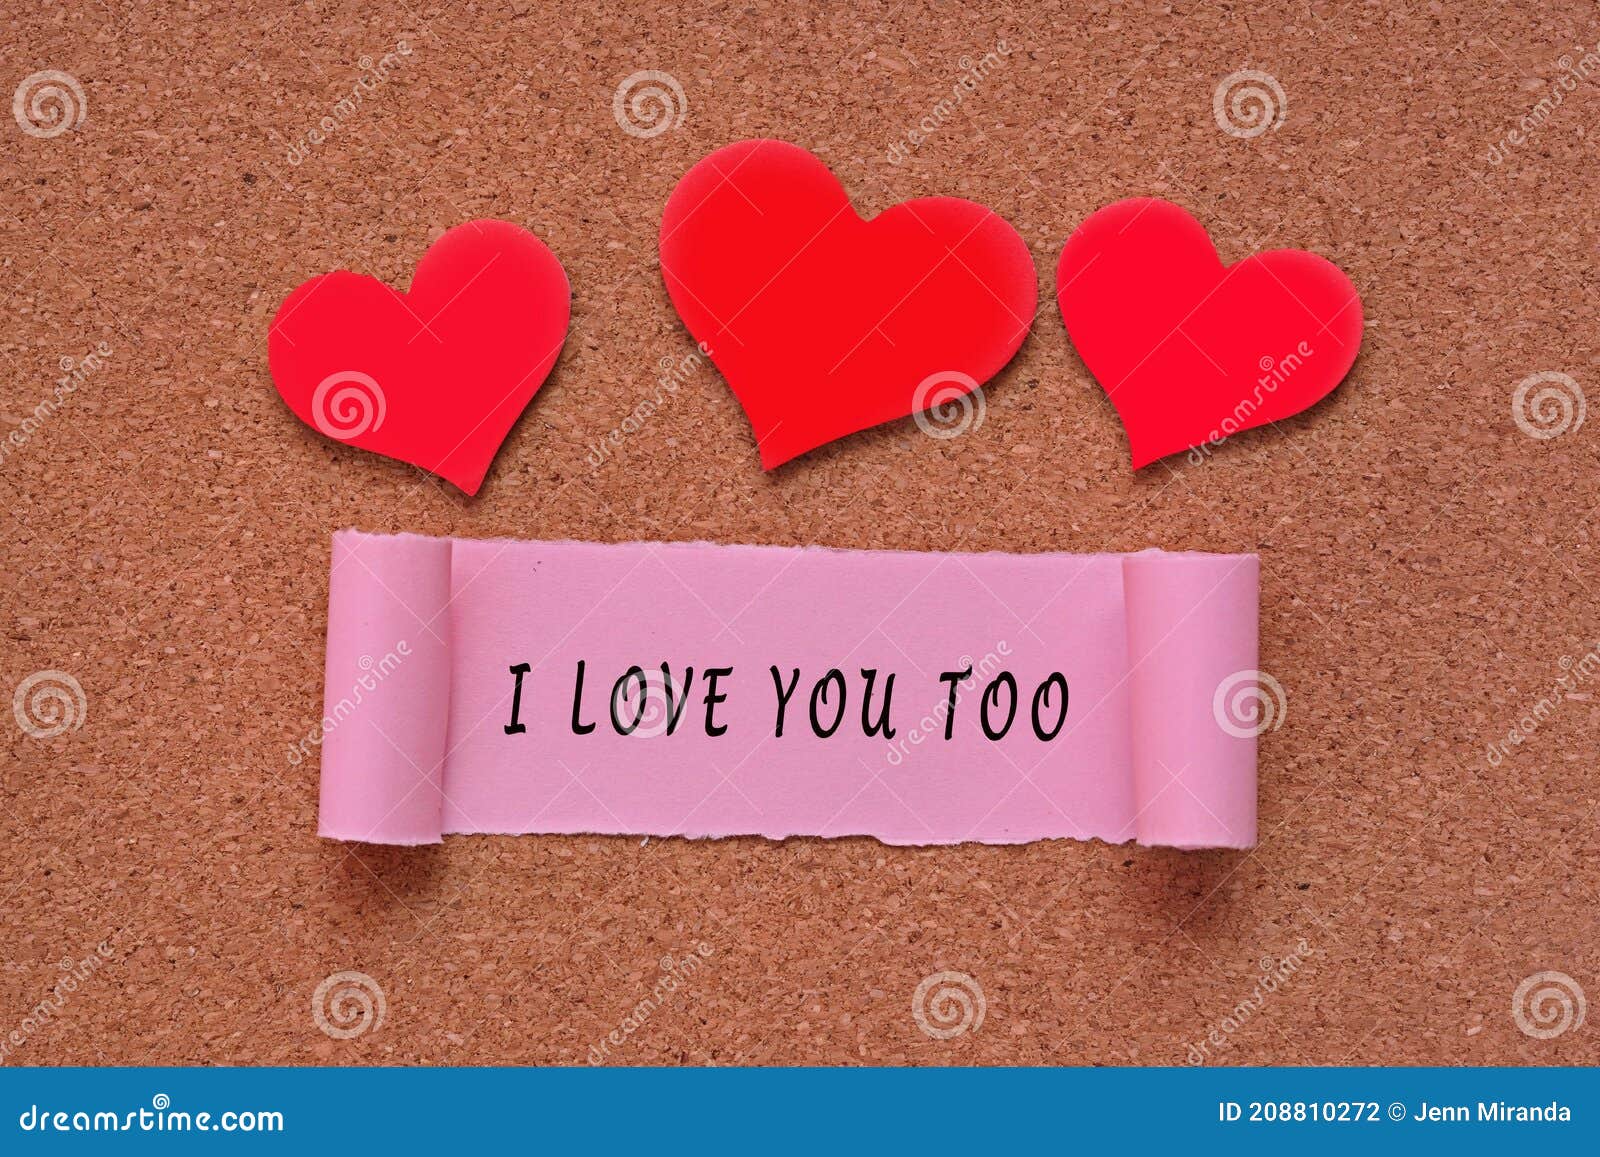 I Love You Too Label on Torn Paper with Heart Shape on Wooden ...